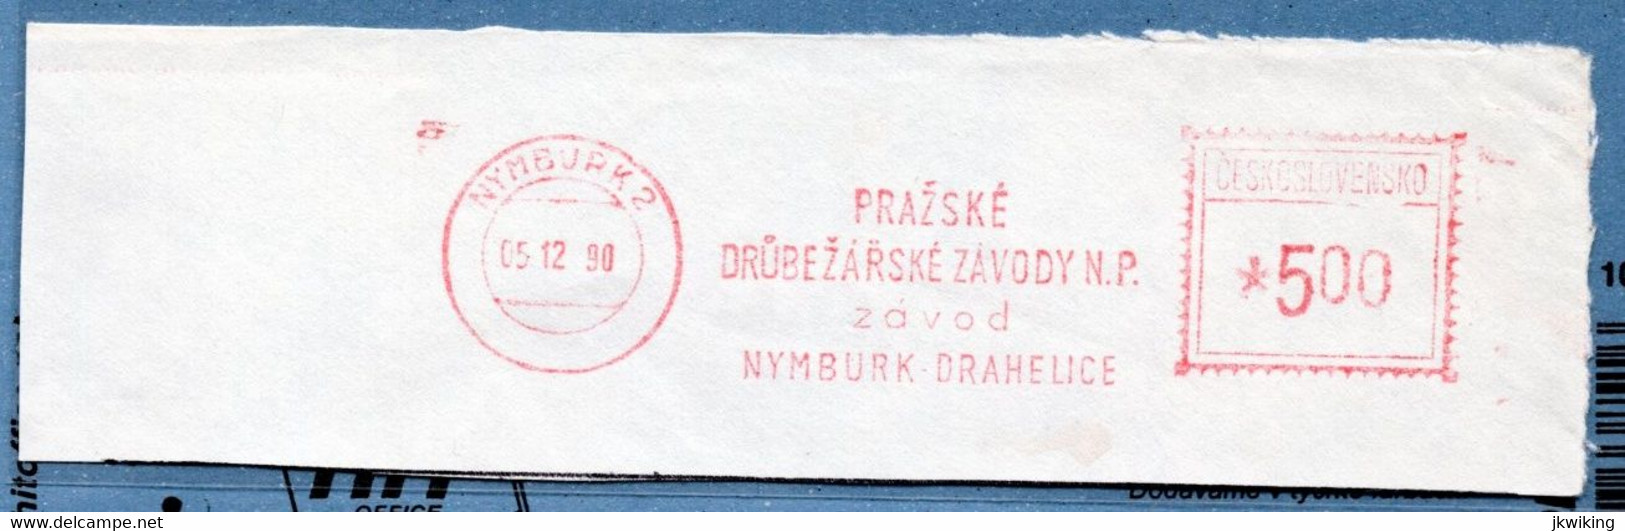 Postage Stamp - Poultry Farms - Poultry - Hens - Nymburk 2 - 5.12.1990 - Werbestempel